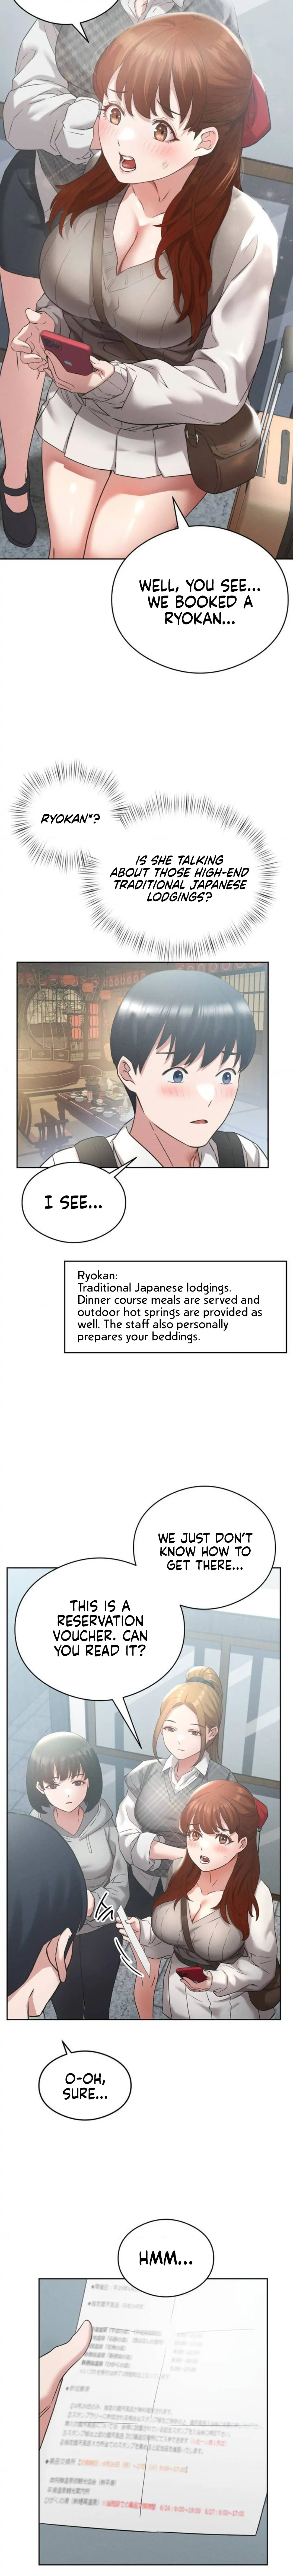 Shall We Go To The Ryokan Together? - Chapter 1 Page 12